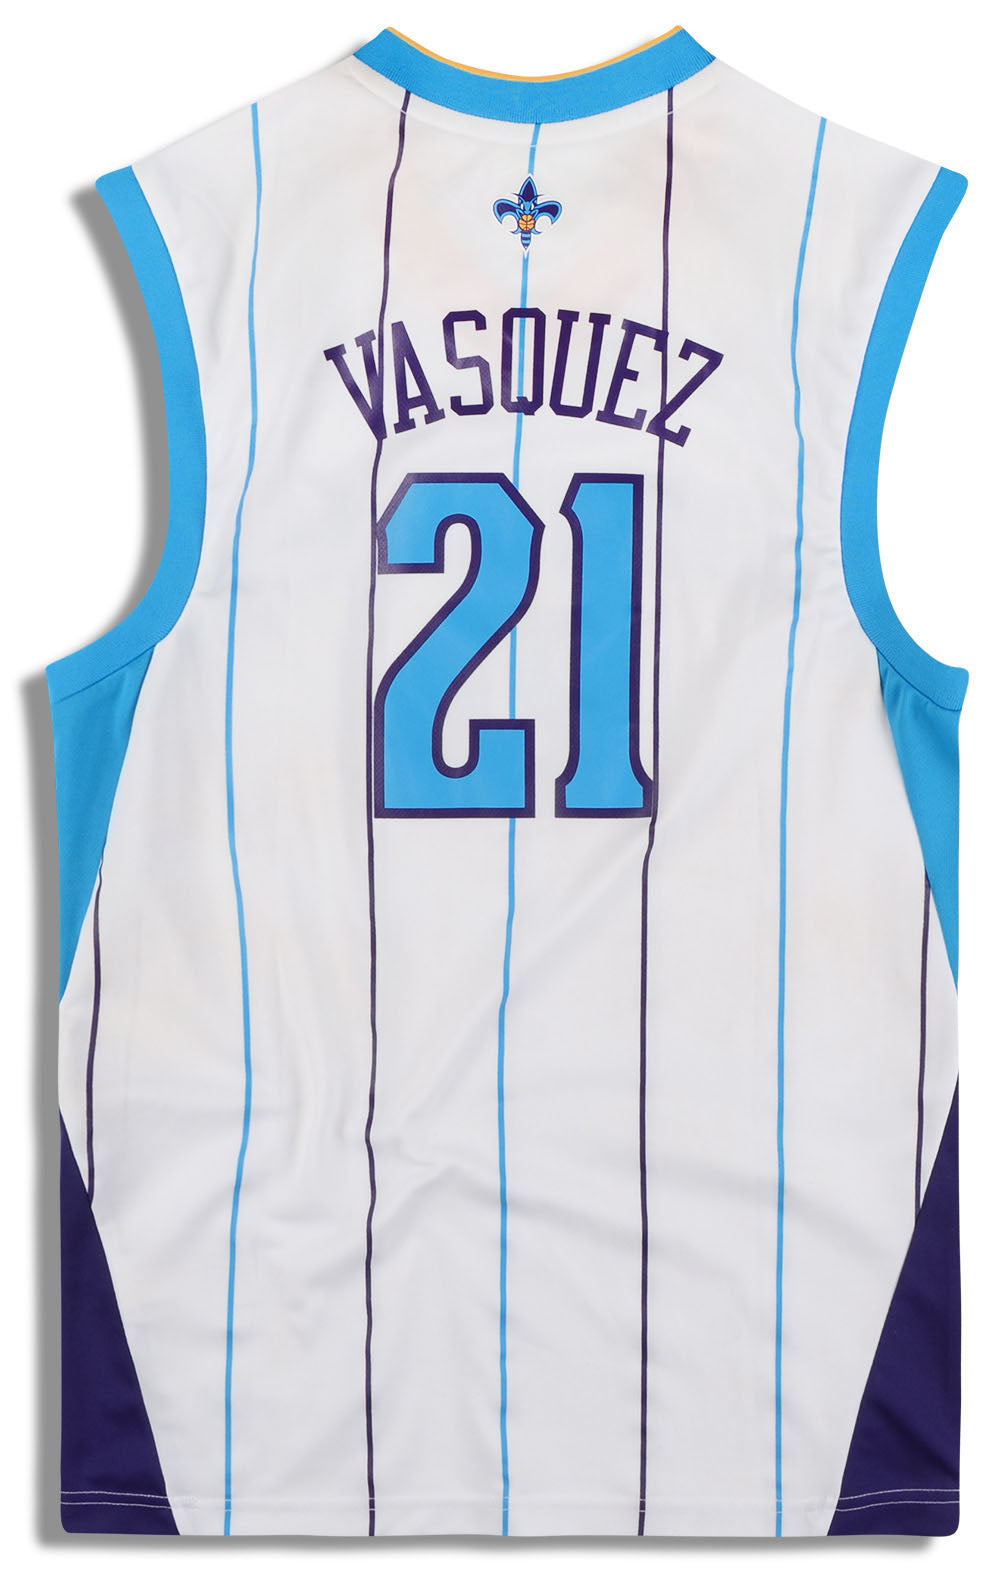 2011-13 NEW ORLEANS HORNETS VASQUEZ #21 ADIDAS JERSEY (HOME) S